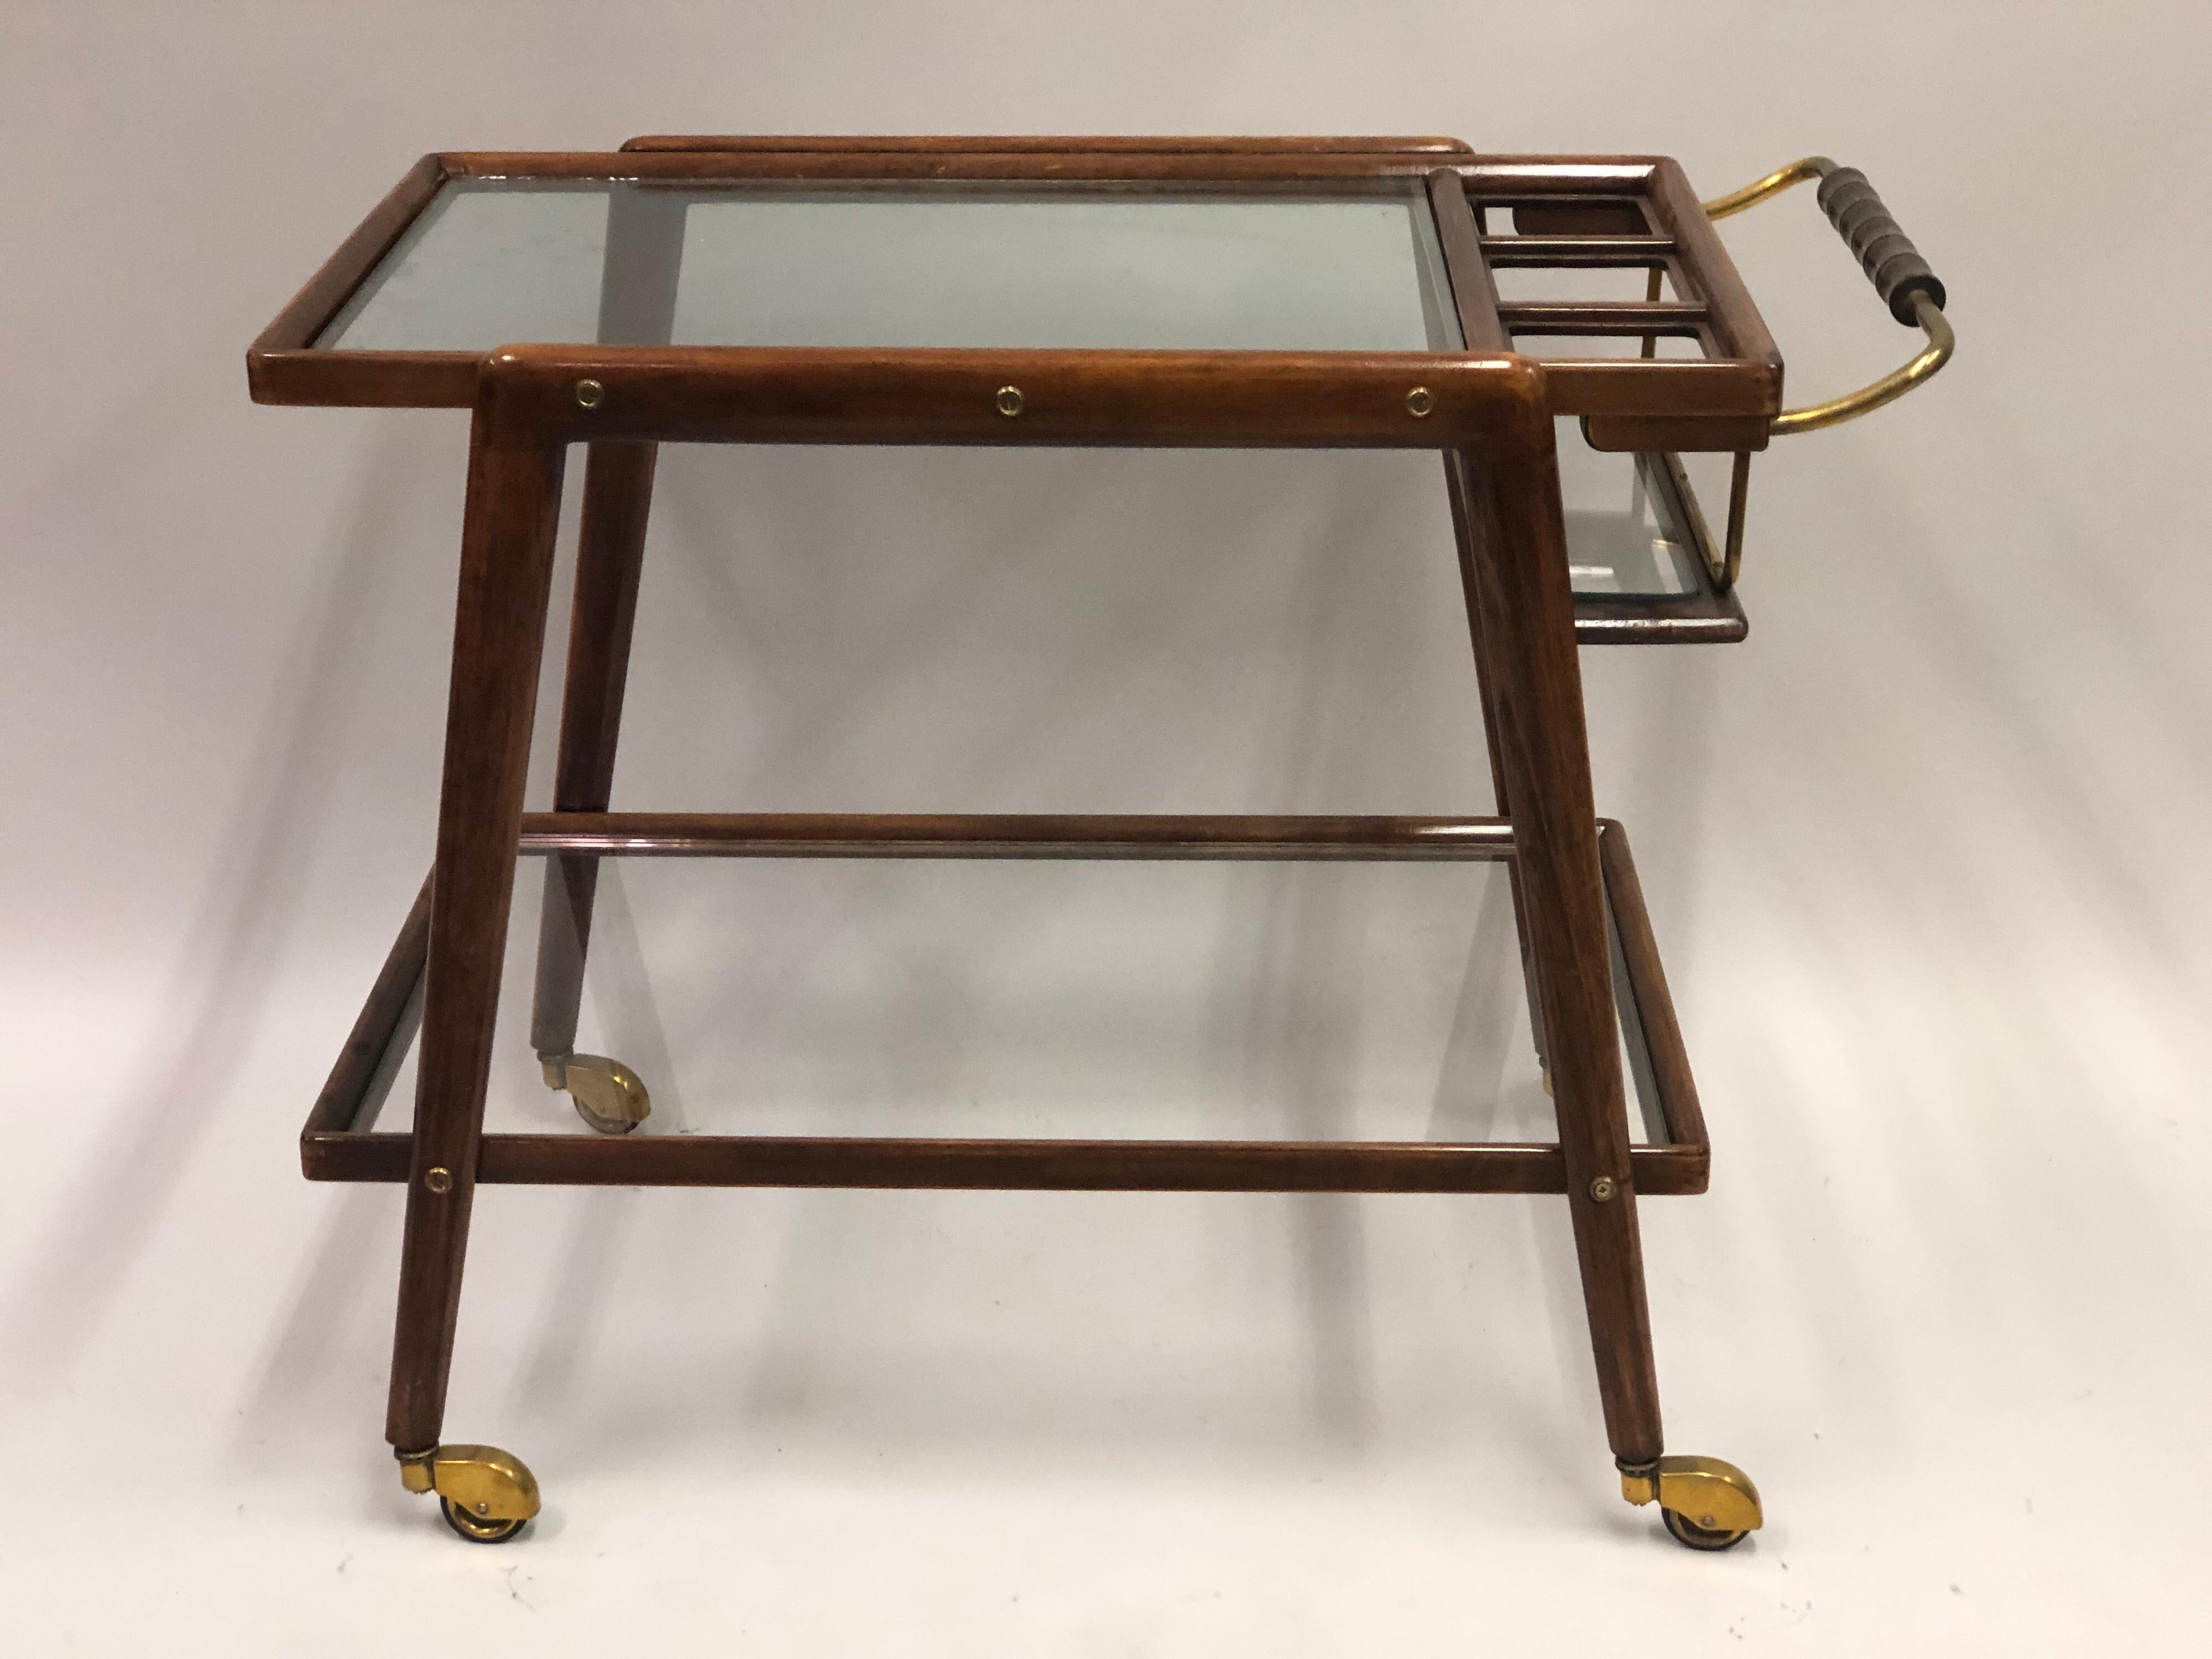 An elegant and stylish form.

Italian Mid-Century Modern bar cart in walnut wood with thick double level glass shelves and a separate bottle compartment for 3 bottles. A brass handle with carved wood grips completes the piece.

Solid brass